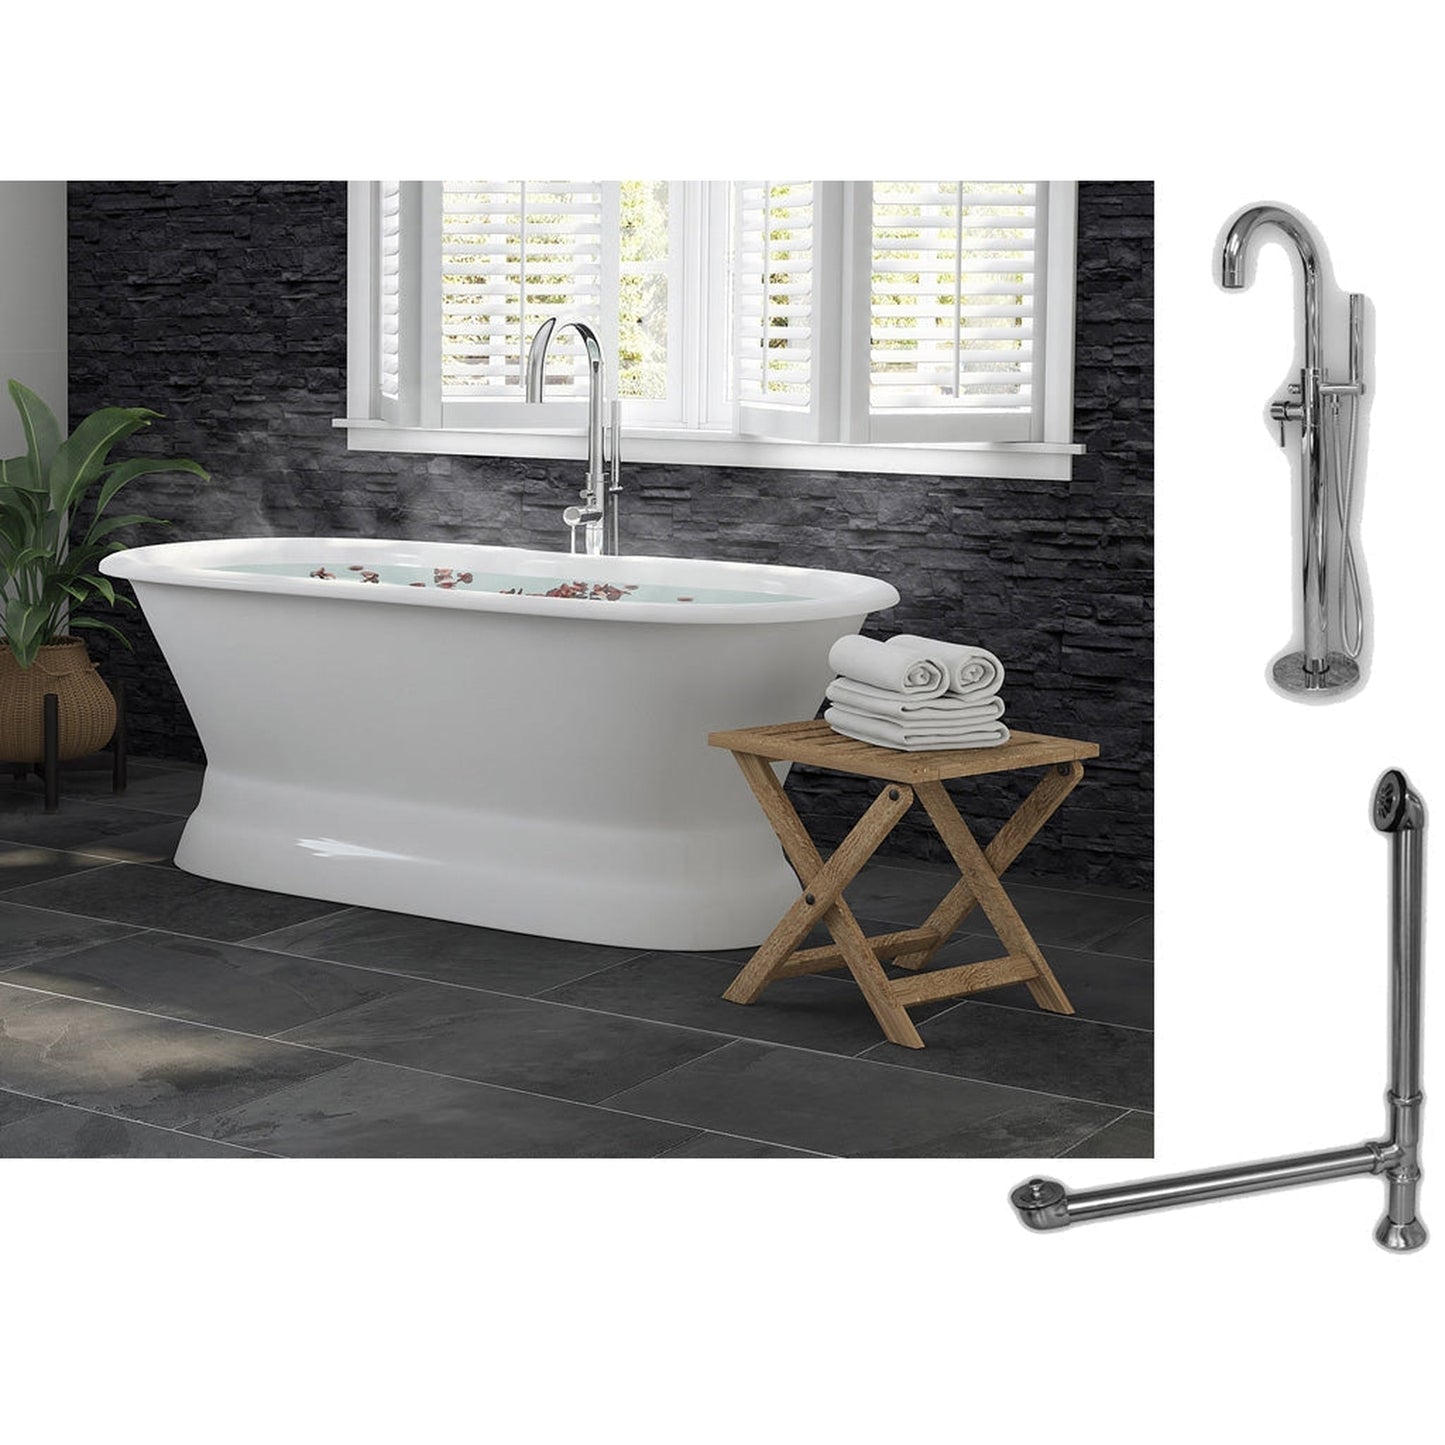 Cambridge Plumbing 66" White Cast Iron Double Ended Pedestal Bathtub With No Deck Holes And Complete Plumbing Package Including Modern Floor Mounted Faucet, Drain And Overflow Assembly In Oil Rubbed Bronze